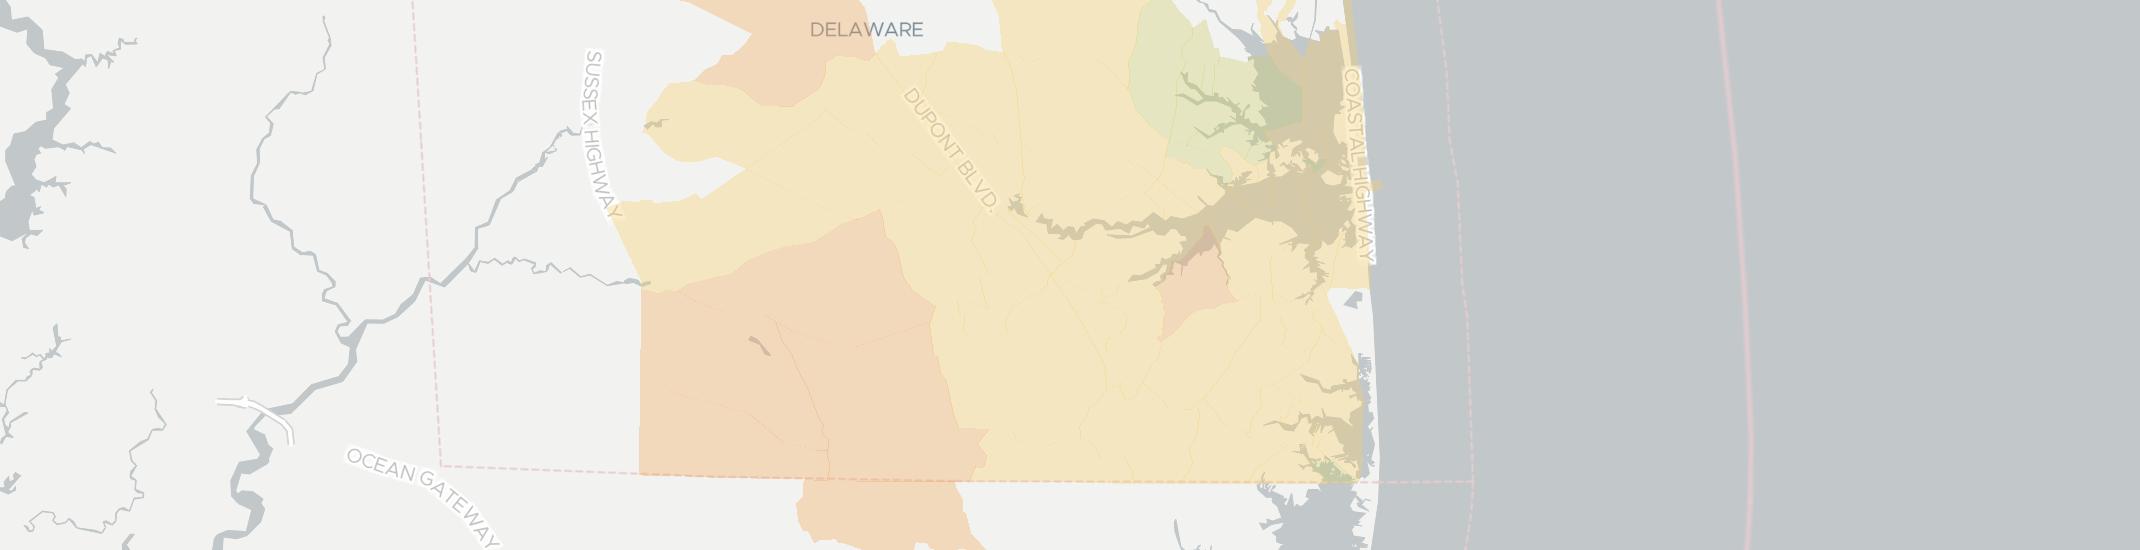 Millsboro Internet Competition Map. Click for interactive map.